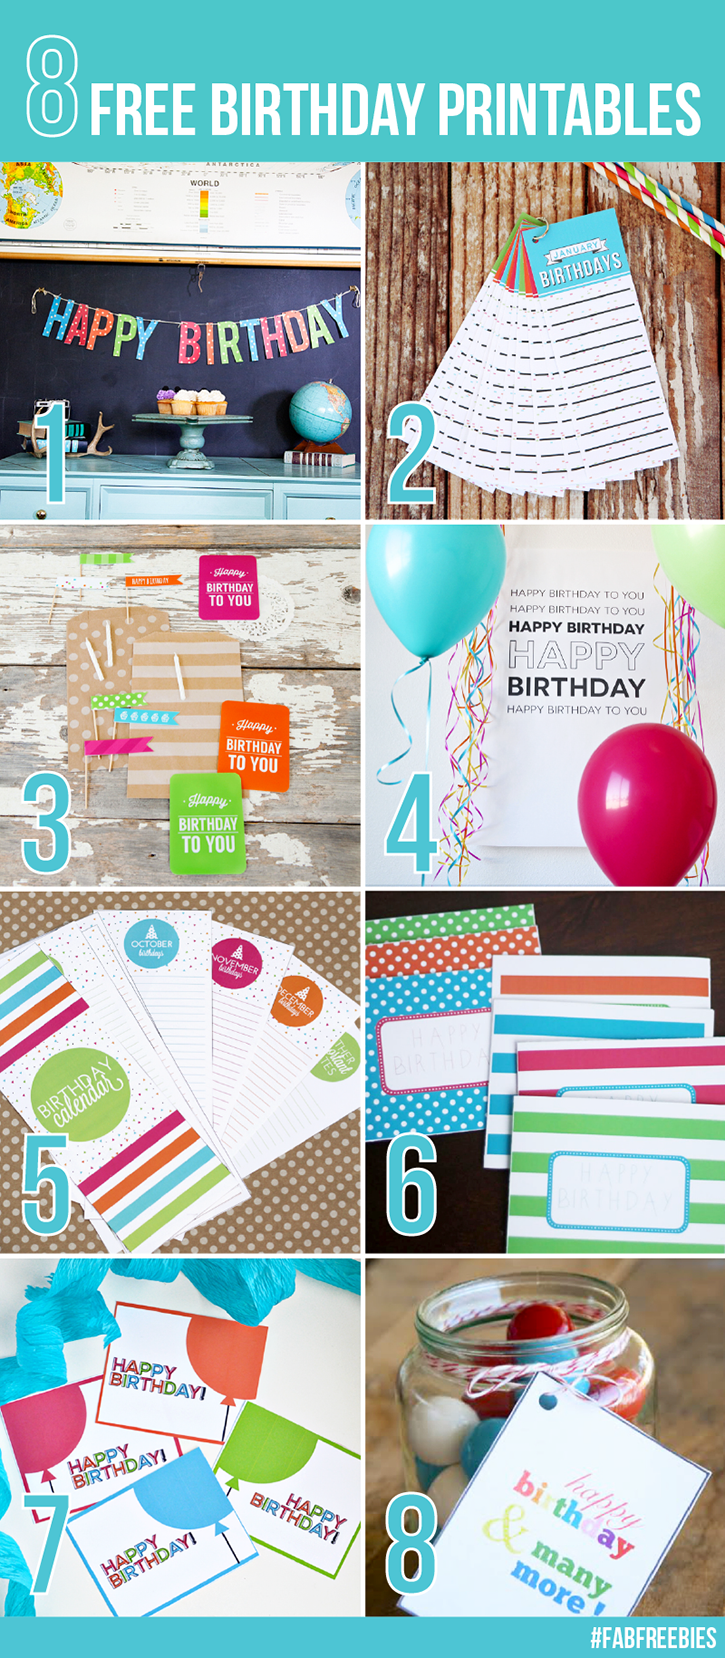 http://simpleasthatblog.com/wp-content/uploads/2014/08/Birthday-Free-Printables-Roundup.png